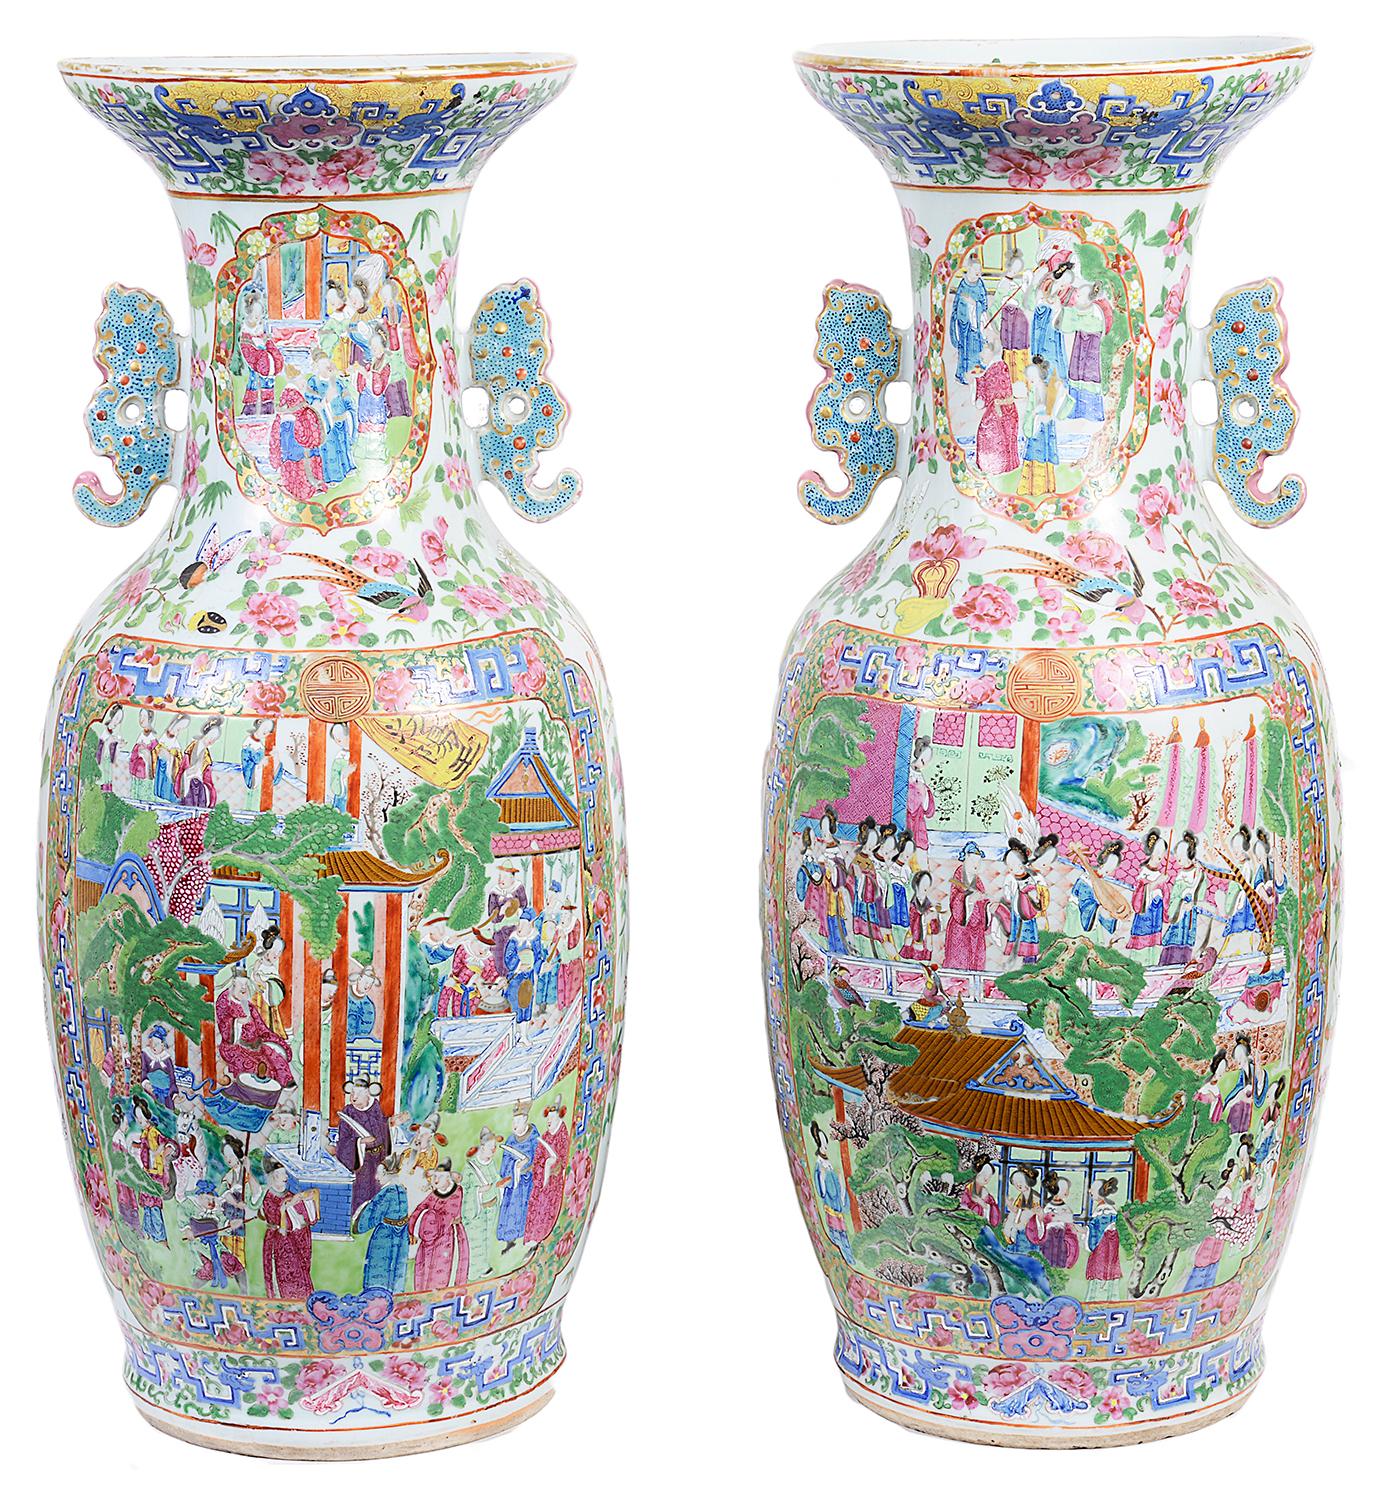 An imposing and very good quality pair of Cantonese / rose medallion vase. Each having wonderful bold colors, the inset hand painted panels depicting interior scenes of courtiers and their attendants, bordered by classical motif, flowers and